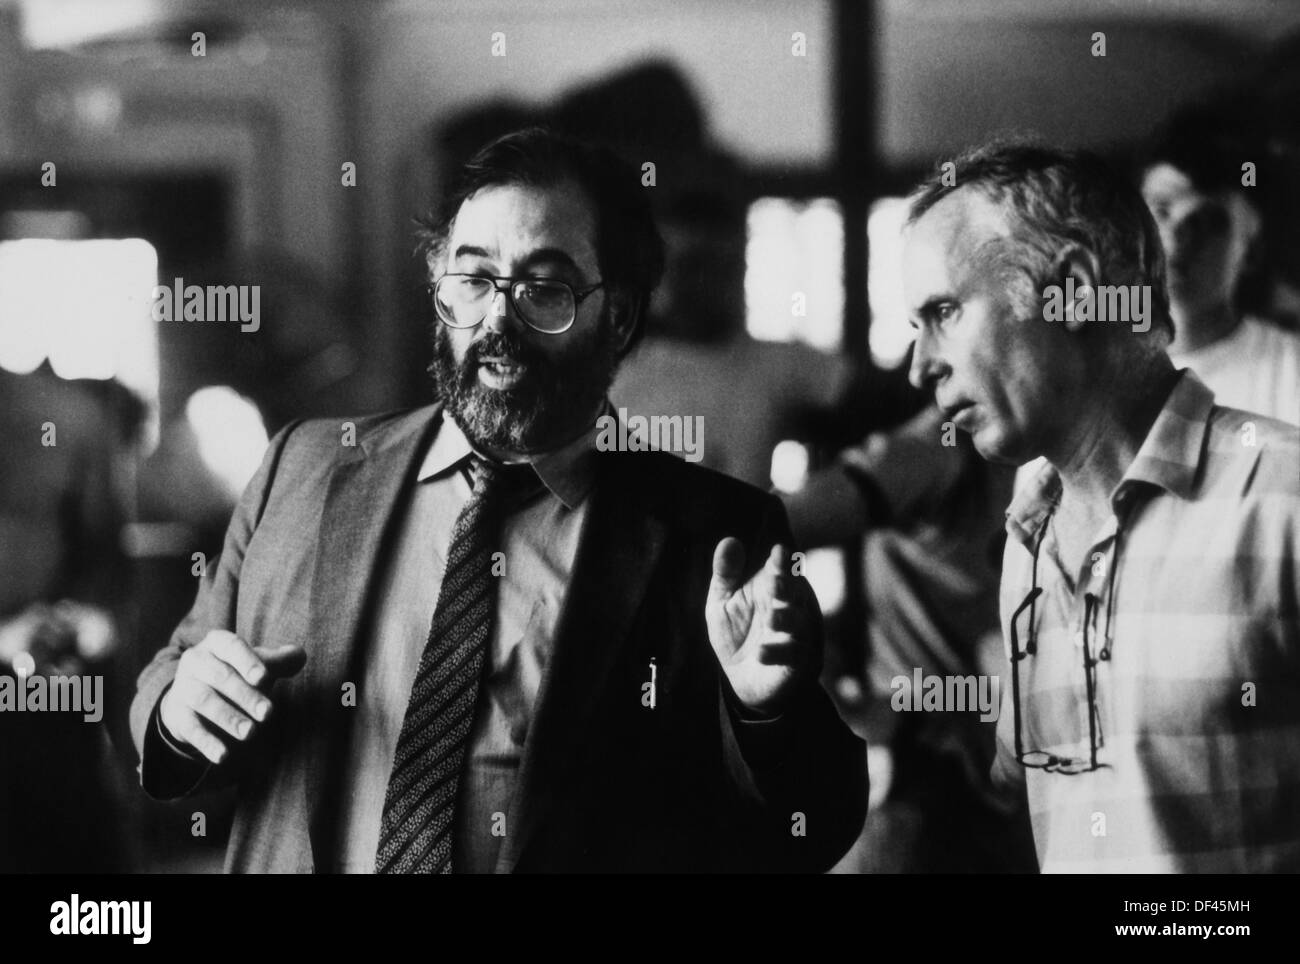 Director Francis Ford Coppola with Jordan Cronenweth, Director of Photography, on-set of the Film, 'Gardens of Stone', American Zoetrope with Distribution via TriStar Pictures, 1987 Stock Photo